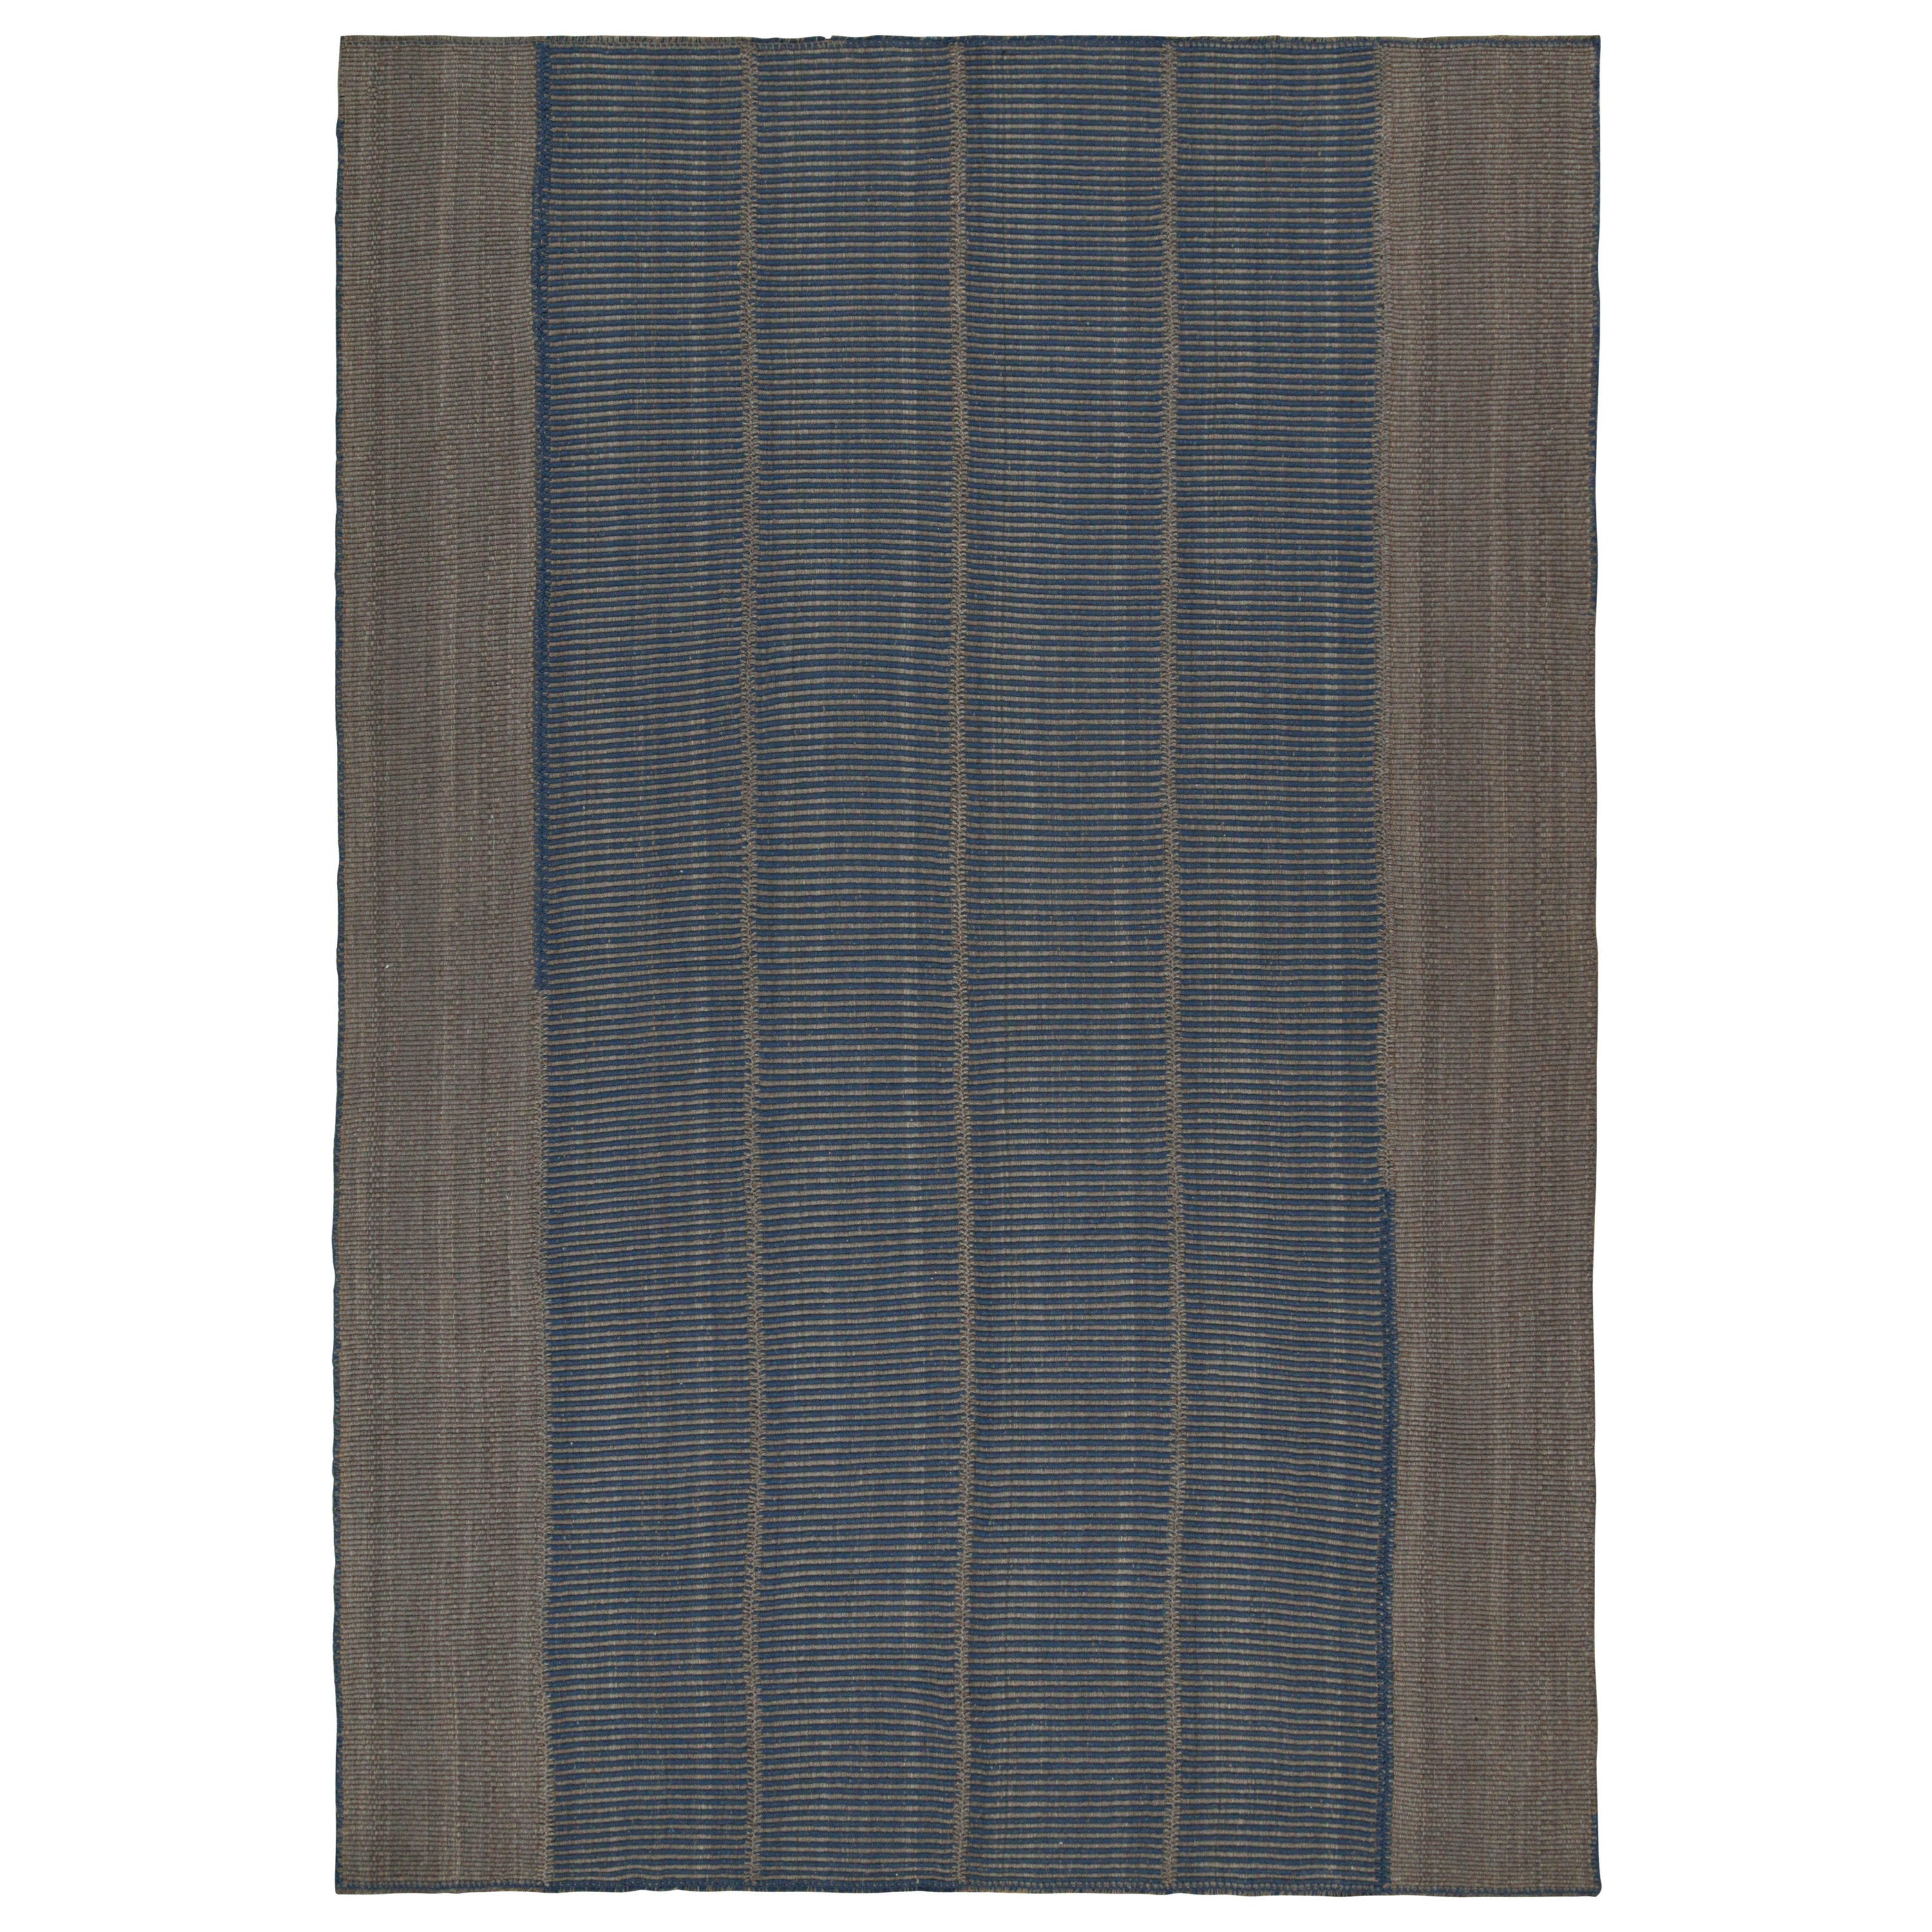 Rug & Kilim’s Contemporary Kilim in Blue and Gray with Stripes & Brown Accents